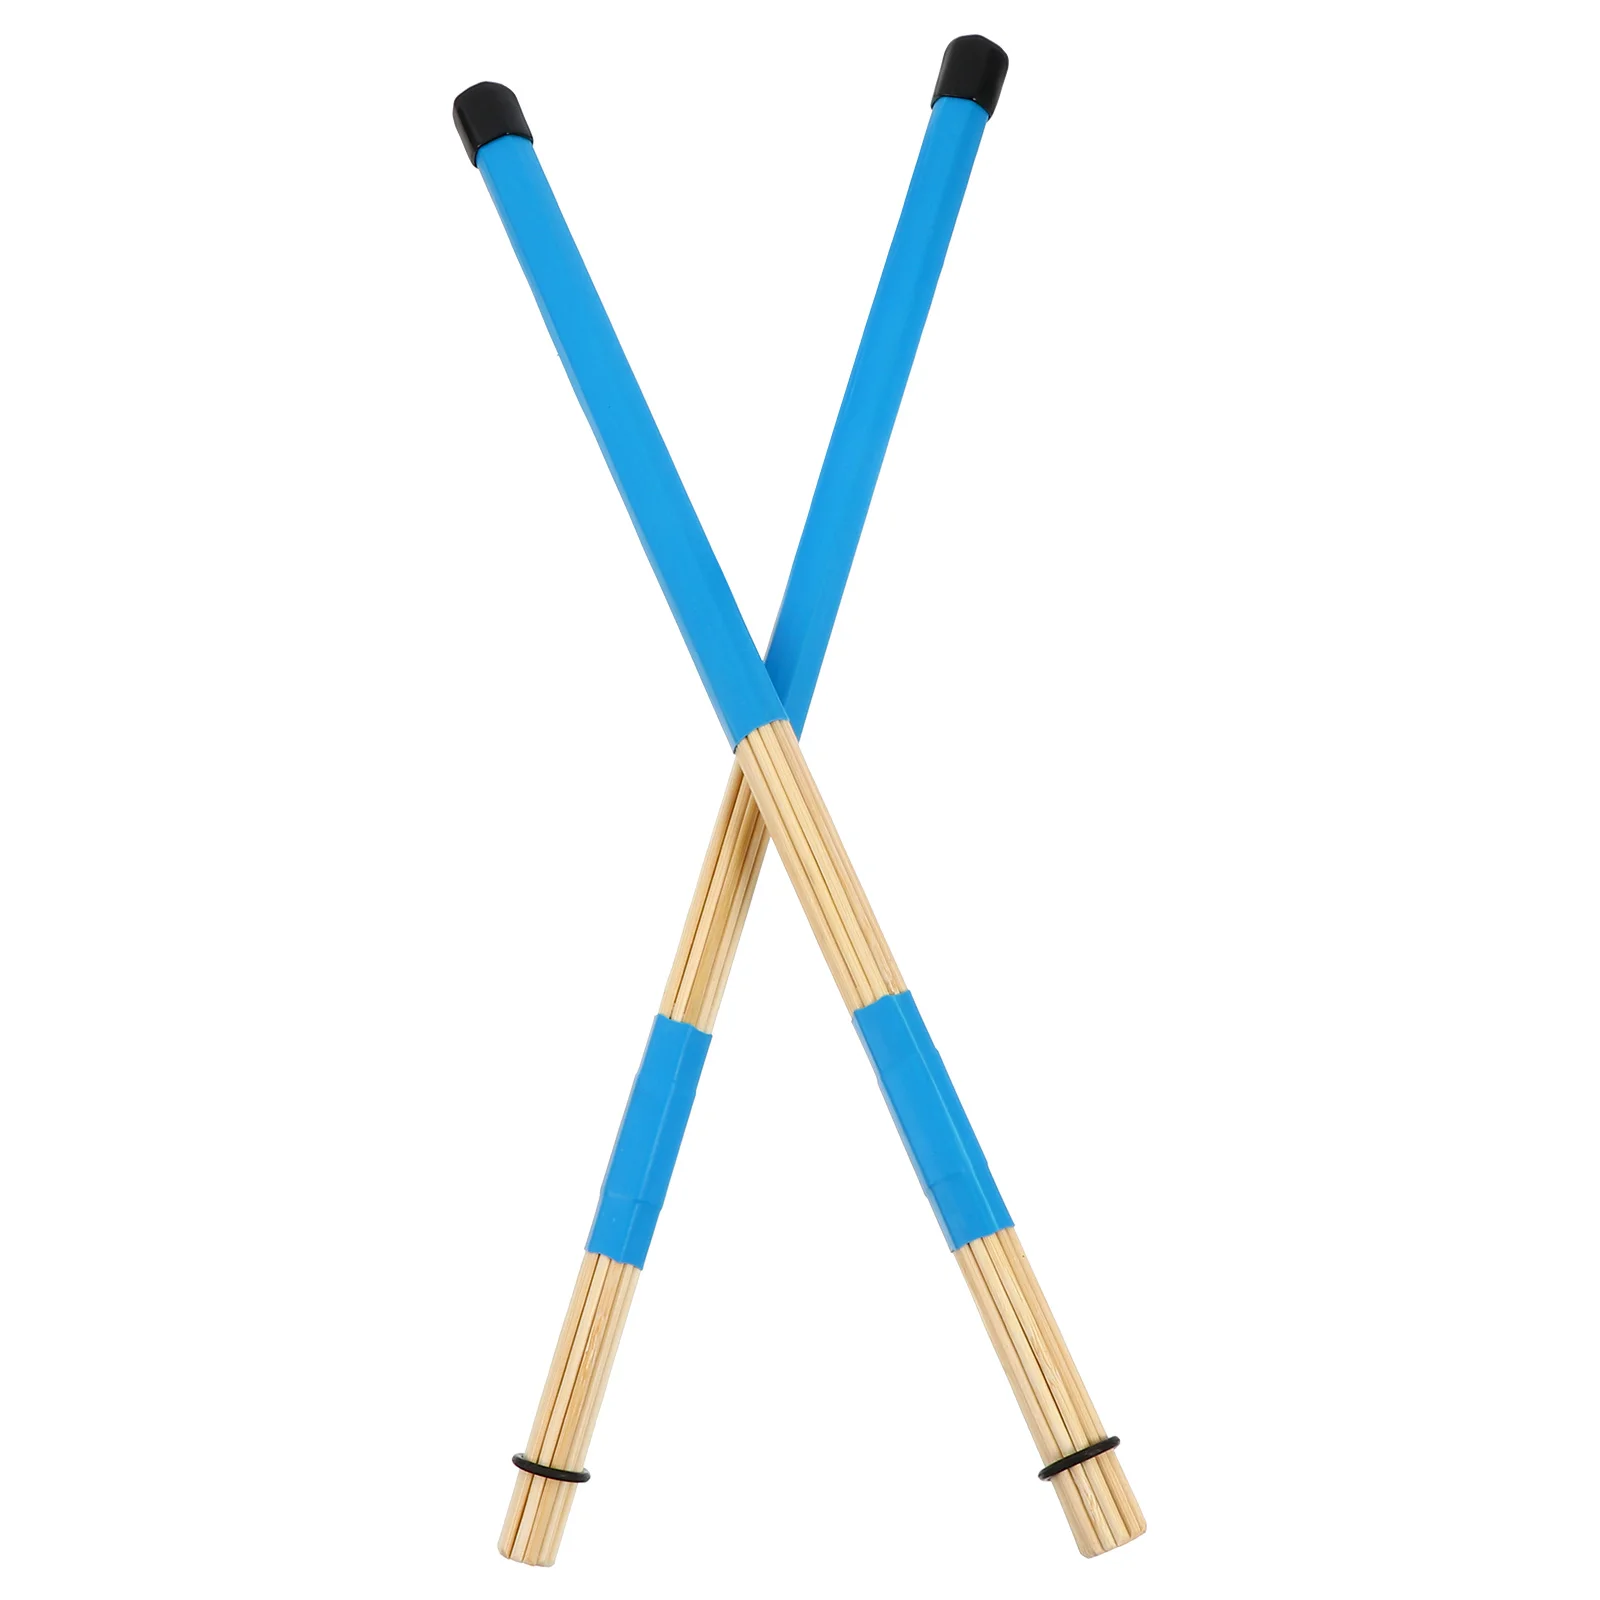 

Drum Sticks Percussion Drumstick Mallets Stick Wood Drumsticks Wooden Instrument Xylophone Bamboo Mallet Brushes Tip Display